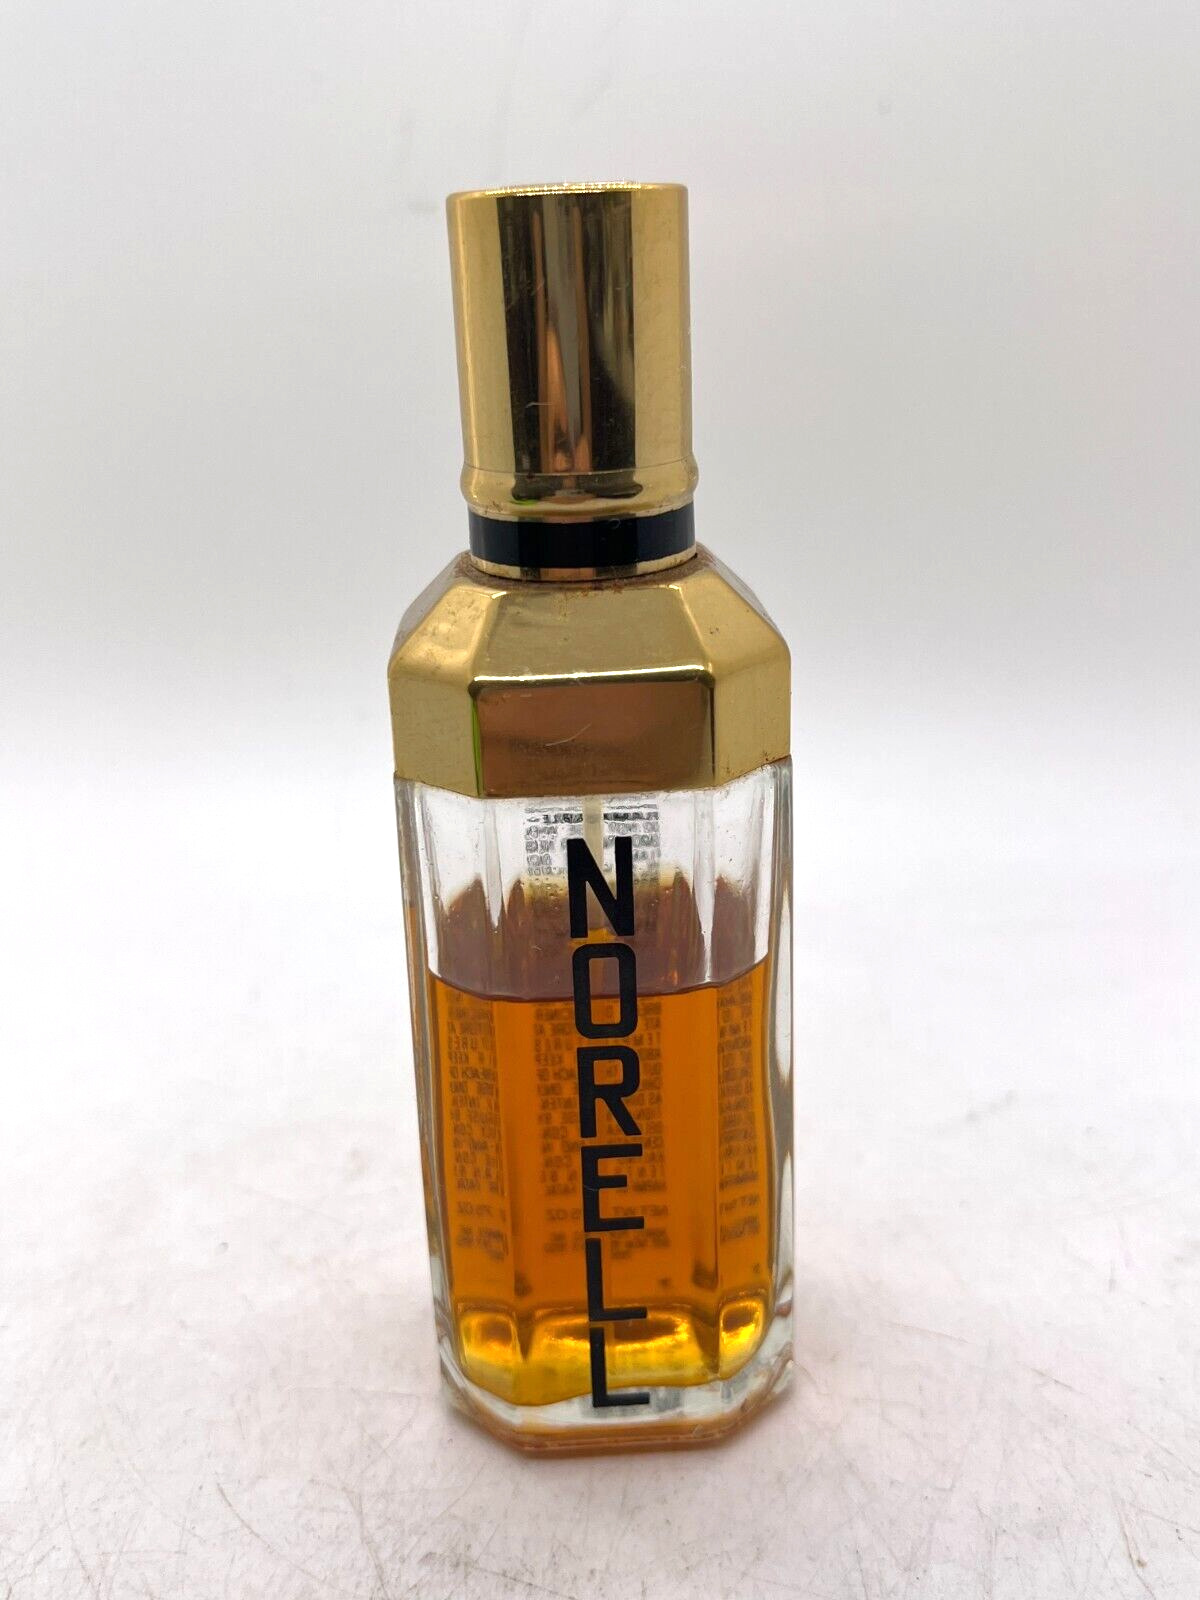 Norell Cologne Spray, Natural 1.75 Fl Oz By Norell Perfumes Inc Vintage 65% Full